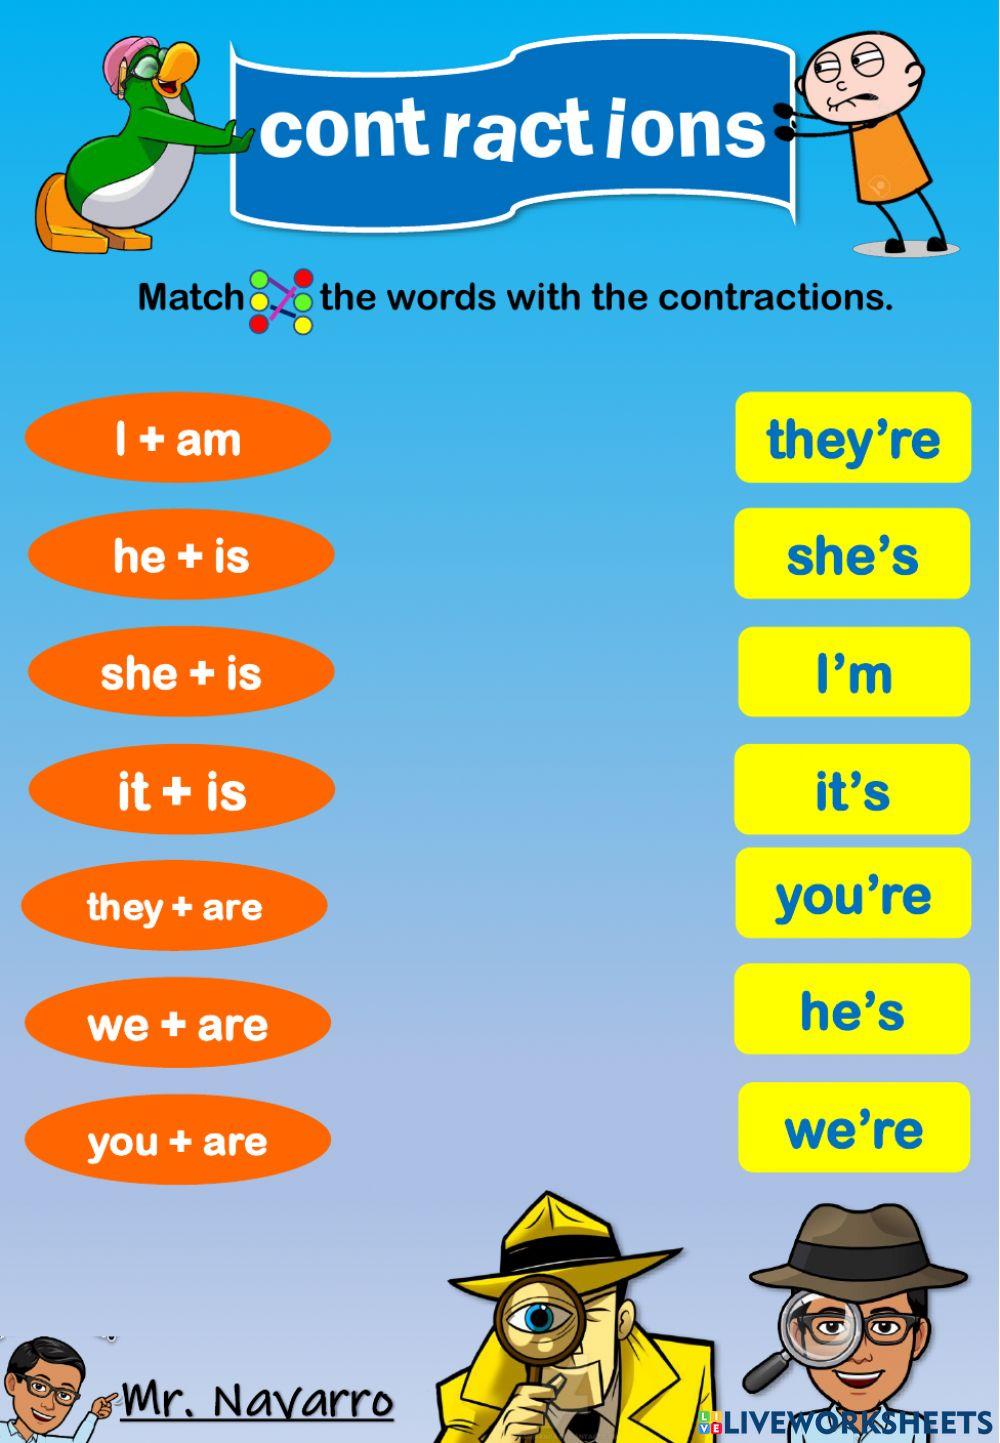 Contractions (Match the words with the contractions)